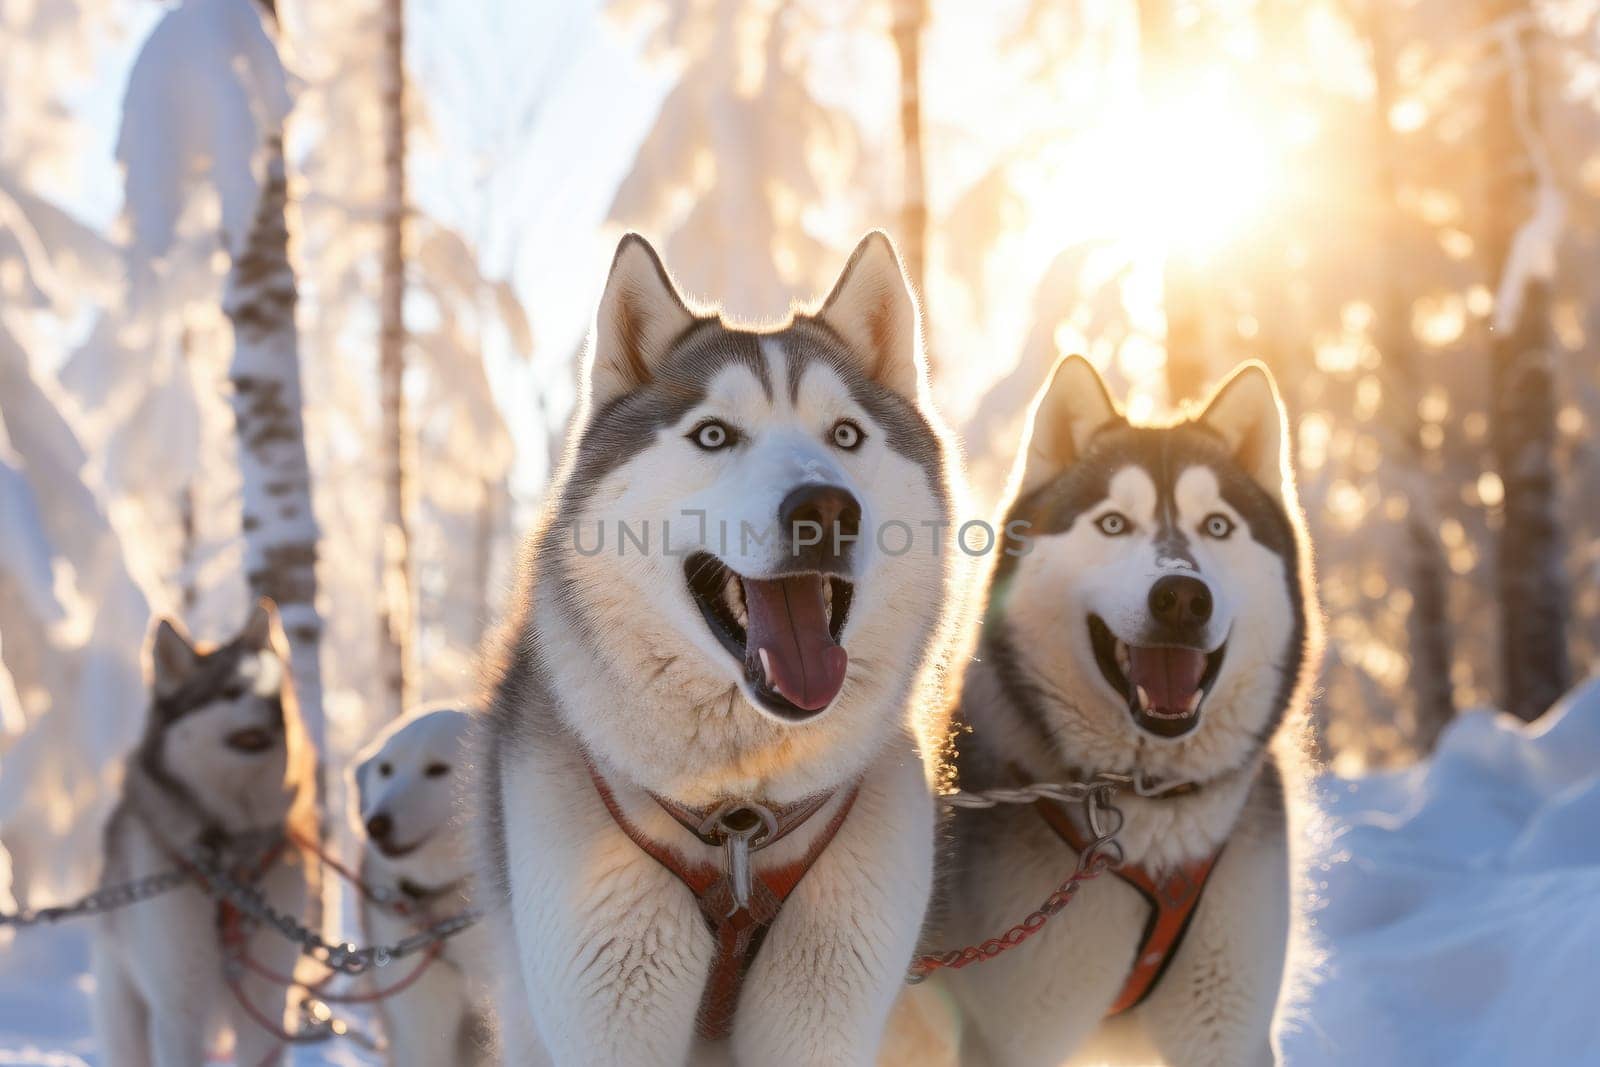 A group of excited huskies ride a sleigh through a stunning snow-covered forest, offering an exhilarating adventure for lovers of winter beauty and nature.